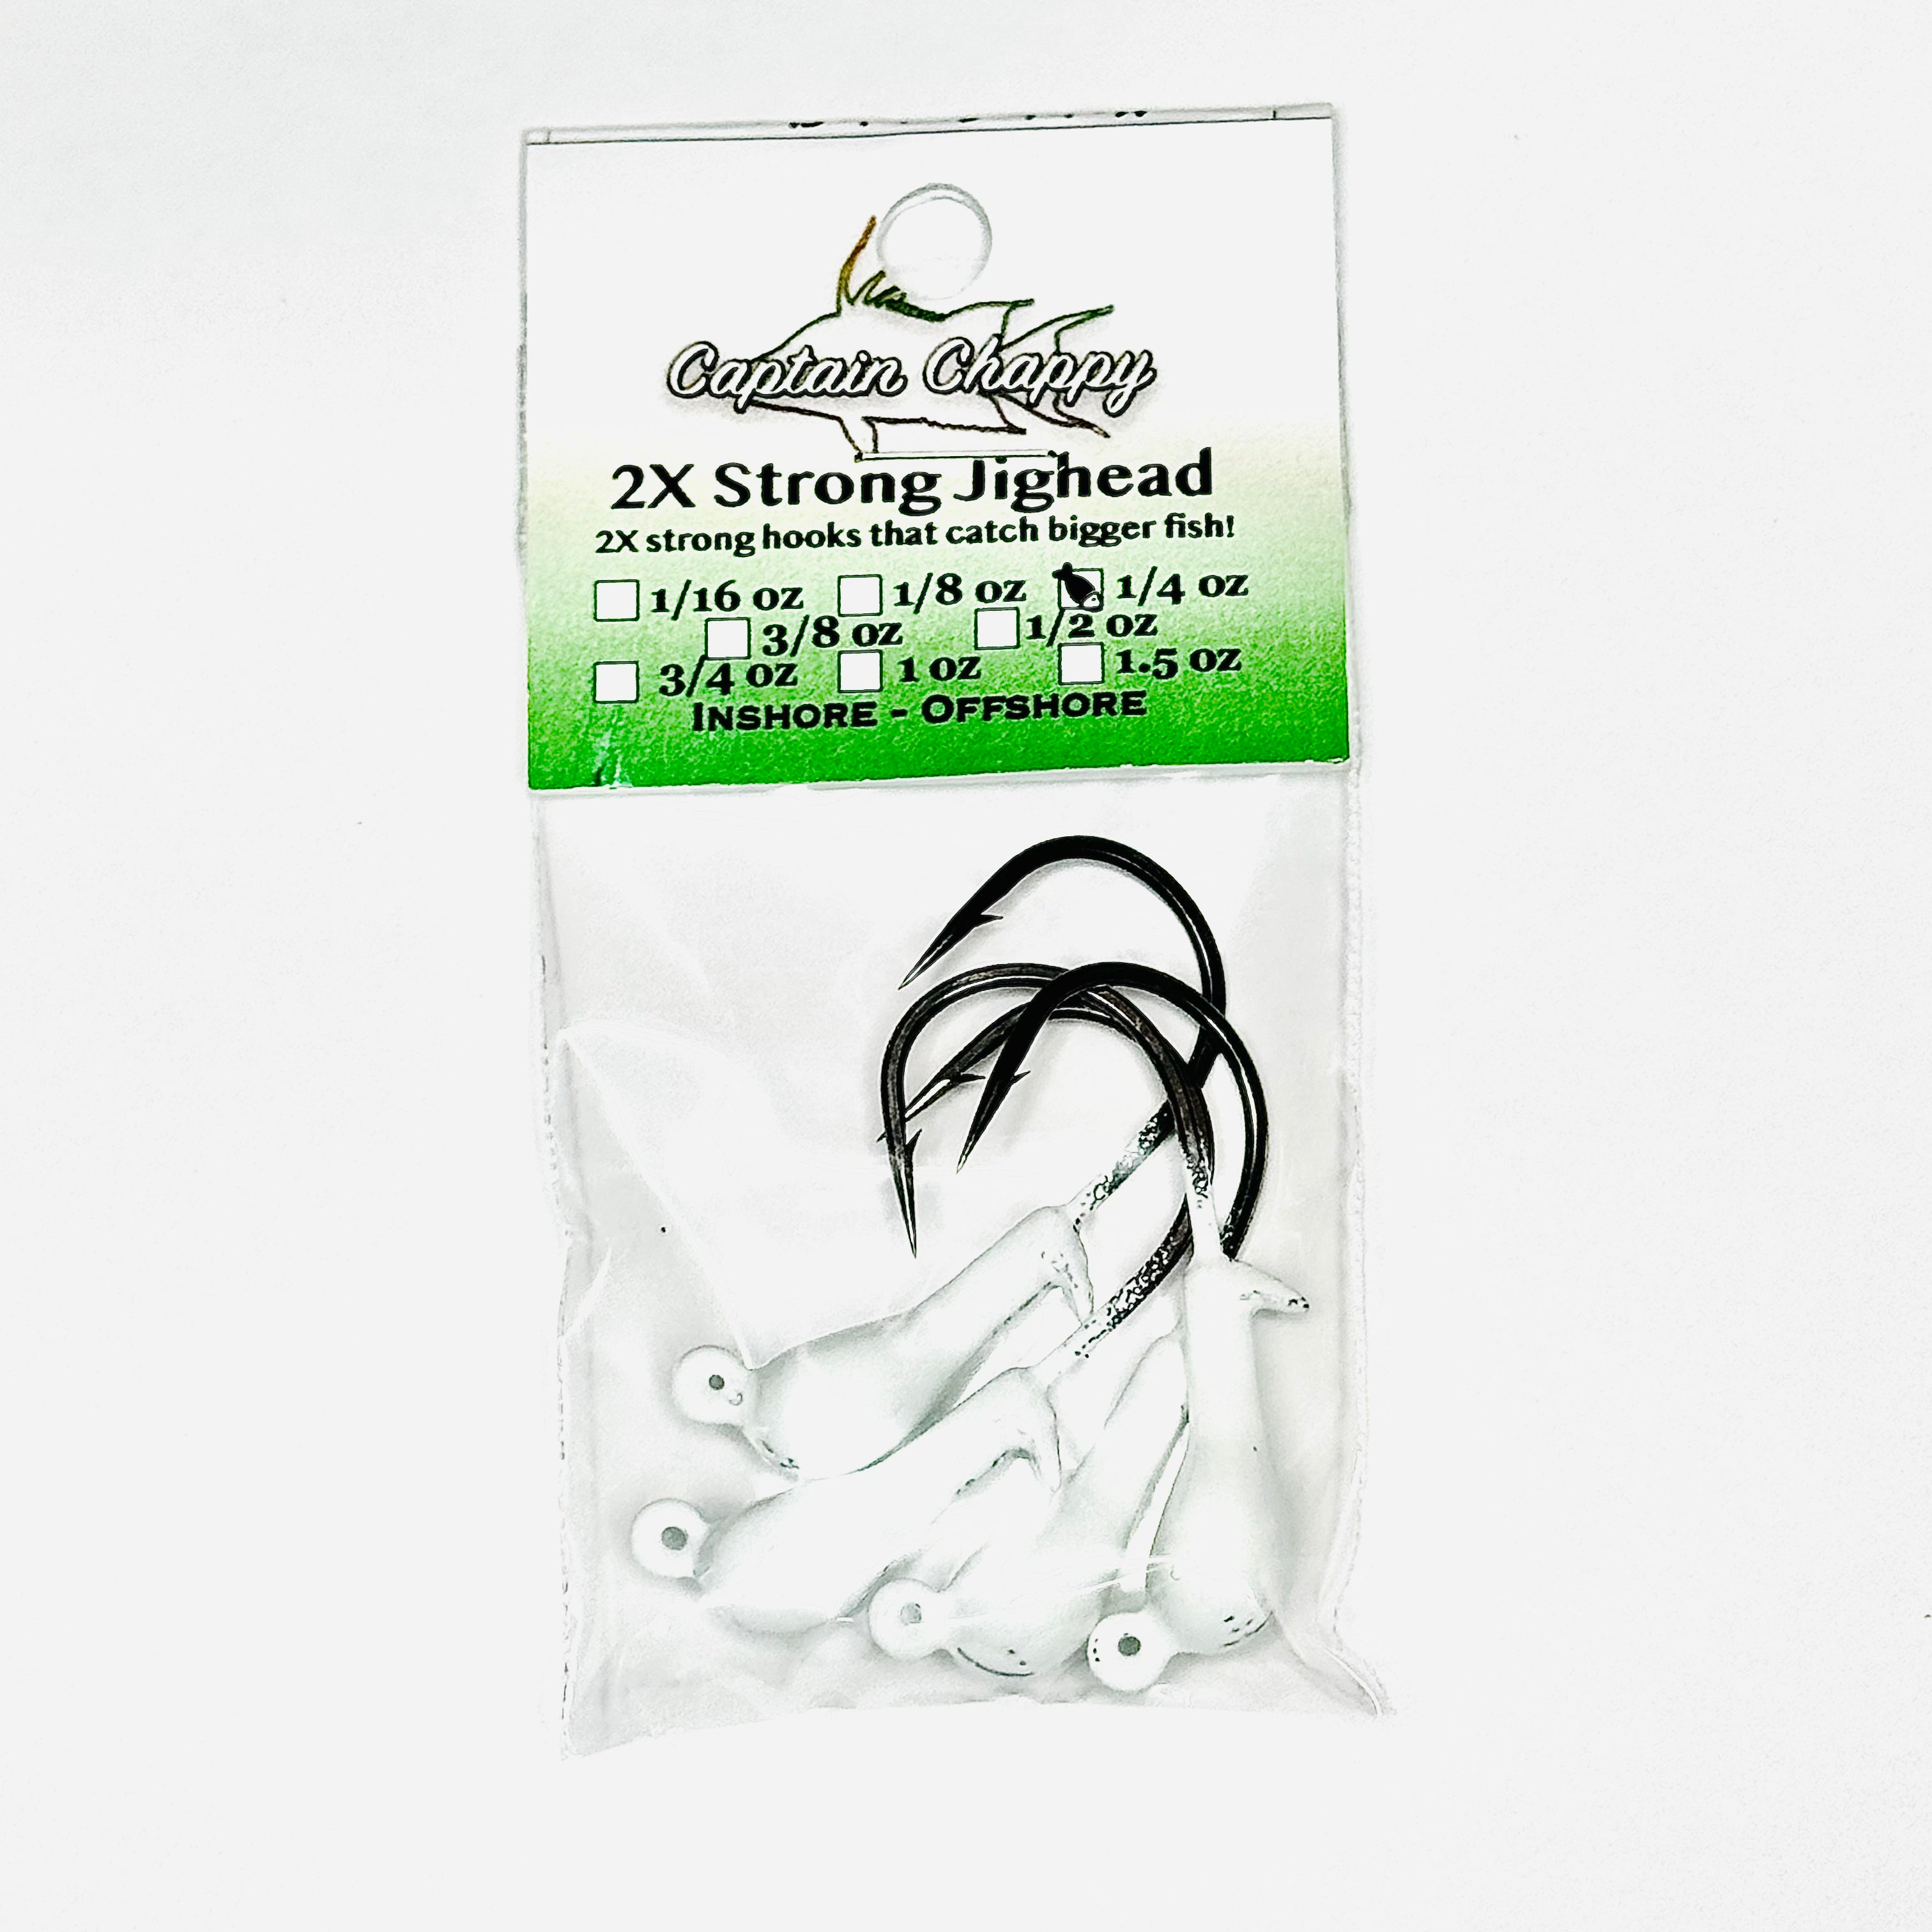 2X Strong Classic Barbed Jighead – CaptainChappy